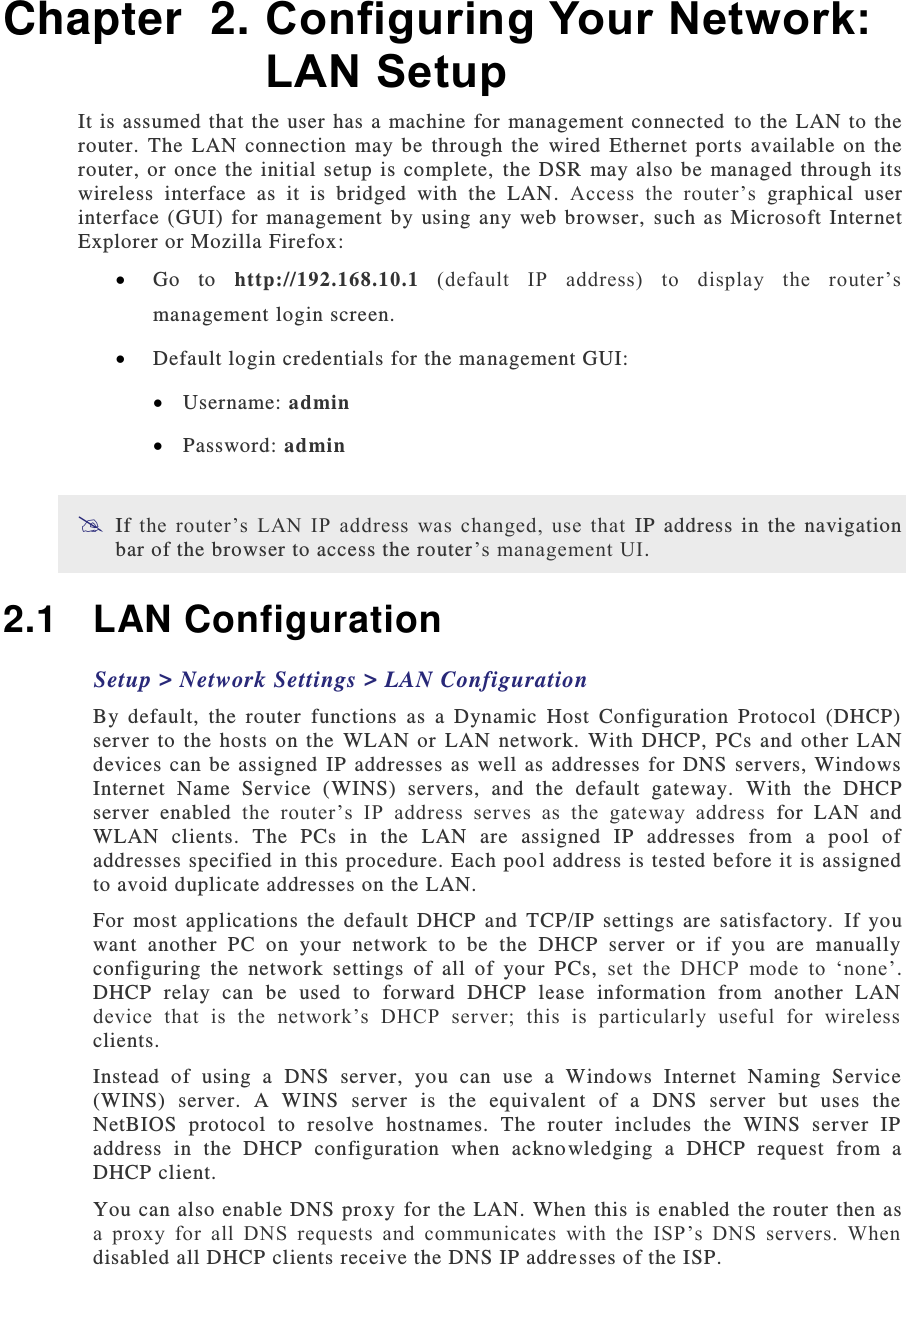  Chapter  2. Configuring Your Network: LAN Setup It is assumed  that the  user  has a  machine  for  management connected  to  the  LAN to the router.  The  LAN  connection  may  be  through  the  wired  Ethernet  ports  available  on  the router, or  once  the  initial setup  is  complete,  the  DSR  may  also be  managed through  its wireless  interface  as  it  is  bridged  with  the  LAN.  Access  the  router’s  graphical  user interface  (GUI)  for management  by  using  any  web browser,  such  as  Microsoft  Internet Explorer or Mozilla Firefox:  Go  to  http://192.168.10.1 (default  IP  address)  to  display  the  router’s management login screen.  Default login credentials for the ma nagement GUI:  Username: admin  Password: admin  If the  router’s  LAN  IP  address  was  changed,  use  that  IP  address  in  the  navigation bar of the browser to access the router’s management UI. 2.1  LAN Configuration Setup &gt; Network Settings &gt; LAN Configuration By  default,  the  router  functions  as  a  Dynamic  Host  Configuration  Protocol  (DHCP) server  to  the hosts  on  the  WLAN  or  LAN  network.  With  DHCP,  PCs  and other  LAN devices can  be  assigned  IP  addresses as  well  as addresses  for  DNS  servers,  Windows Internet  Name  Service  (WINS)  servers,  and  the  default  gateway.   With  the  DHCP server  enabled  the  router’s  IP  address  serves  as  the  gateway  address  for  LAN  and WLAN  clients.  The  PCs  in  the  LAN  are  assigned  IP  addresses  from  a  pool  of addresses specified in this procedure. Each poo l address is tested before it is assigned to avoid duplicate addresses on the LAN. For  most  applications  the  default  DHCP  and  TCP/IP  settings  are  satisfactory.   If  you want  another  PC  on  your  network  to  be  the  DHCP  server  or  if  you  are  manually configuring  the  network  settings  of  all  of  your  PCs,  set  the  DHCP  mode  to  ‘none’. DHCP  relay  can  be  used  to  forward  DHCP  lease  information  from  another  LAN device  that  is  the  network’s  DHCP  server;  this  is  particularly  useful  for  wireless clients.  Instead  of  using  a  DNS  server,  you  can  use  a  Windows  Internet  Naming  Service (WINS)  server.  A  WINS  server  is  the  equivalent  of  a  DNS  server  but  uses  the NetBIOS  protocol  to  resolve  hostnames.  The  router  includes  the  WINS  server  IP address  in  the  DHCP  configuration  when  acknowledging  a  DHCP  request  from  a DHCP client. You  can also enable DNS proxy for the LAN. When this is enabled the router then as a  proxy  for  all  DNS  requests  and  communicates  with  the  ISP’s  DNS  servers.  When disabled all DHCP clients receive the DNS IP addresses of the ISP.  